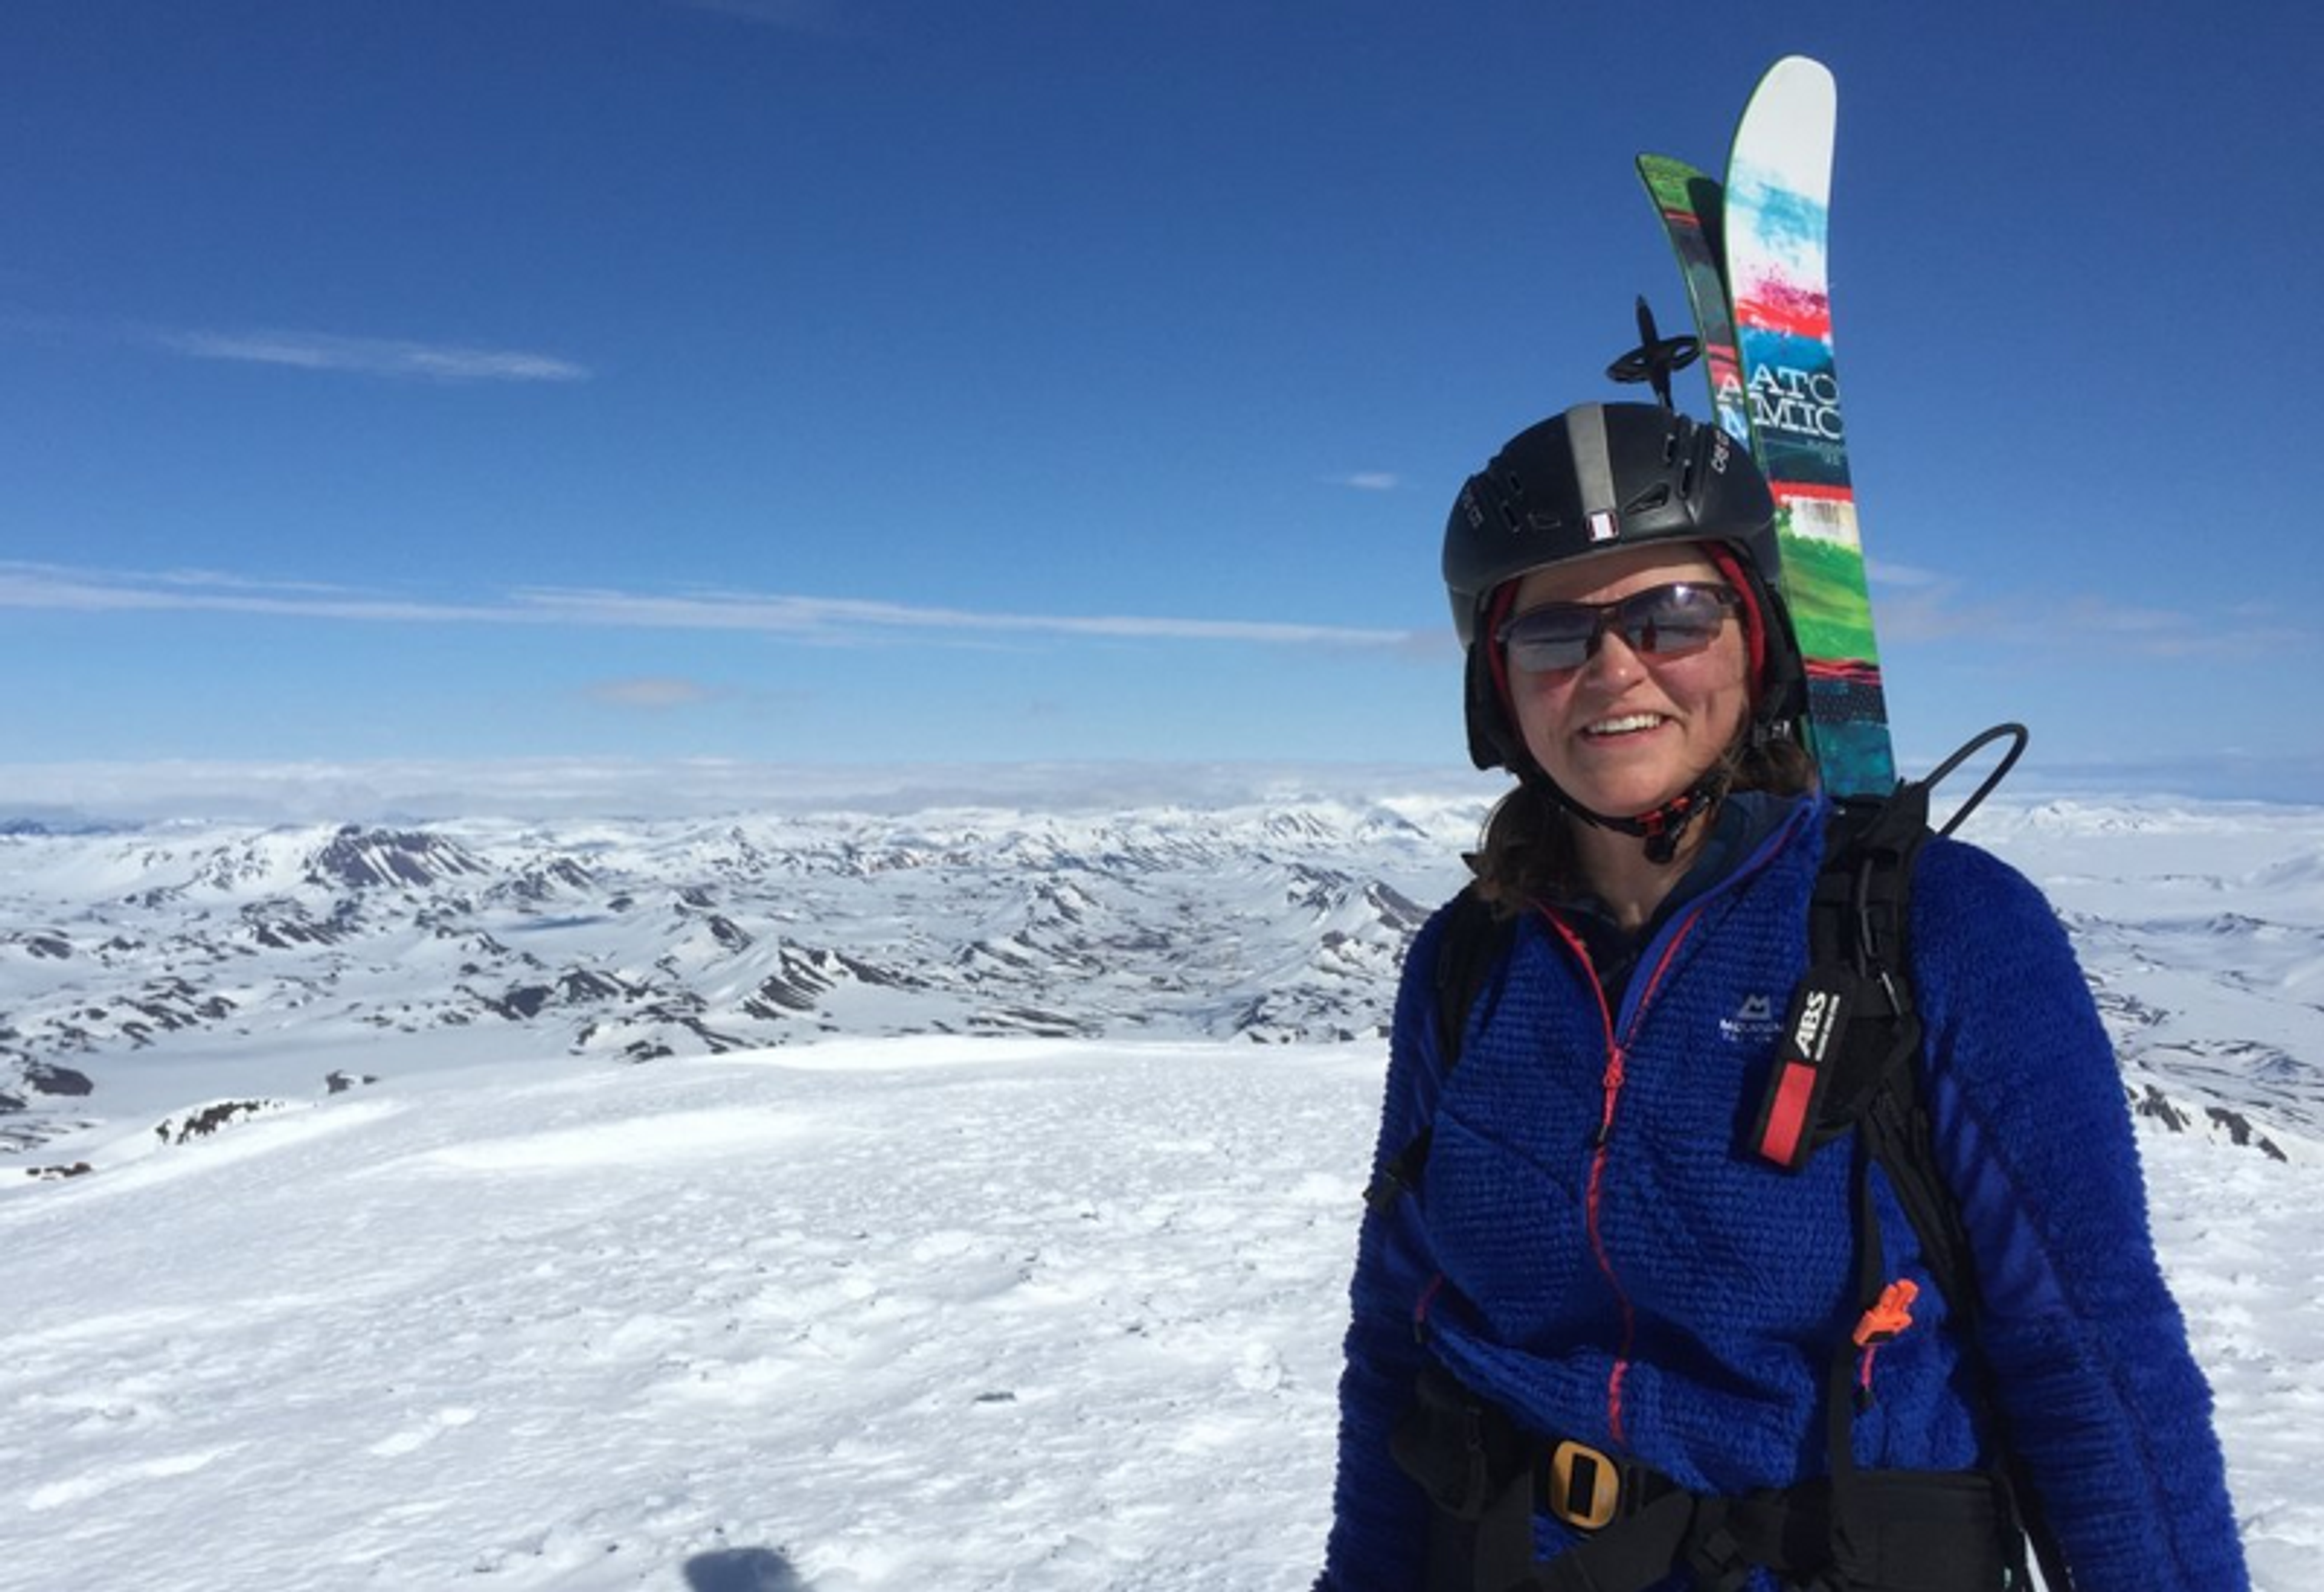 A smiling individual in a blue jacket and ski helmet, with skis attached to their backpack, stands atop a snowy landscape with a panoramic view of mountainous terrain under a clear blue sky.